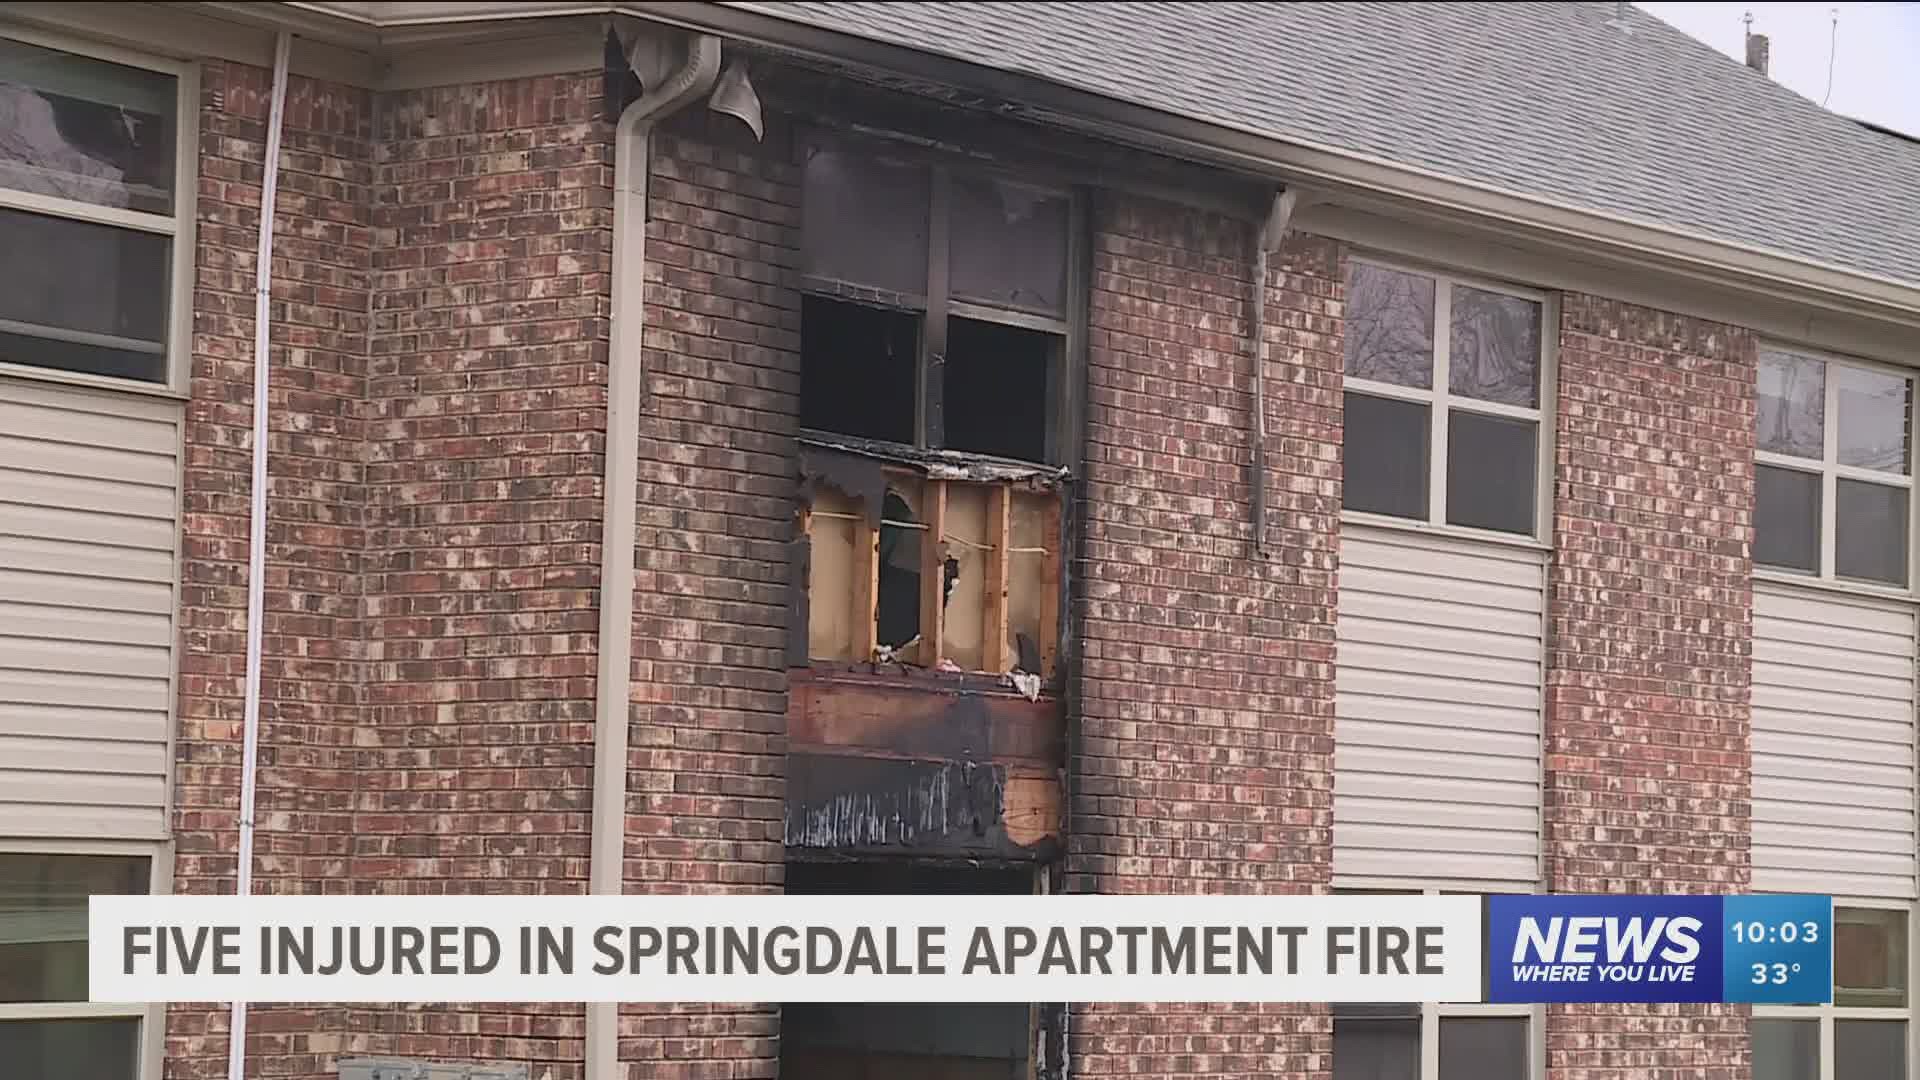 The Springdale Fire Department responded to a structure fire this morning (Jan 2.) at around 5:56 a.m at the 1300 block of AQ Circle.